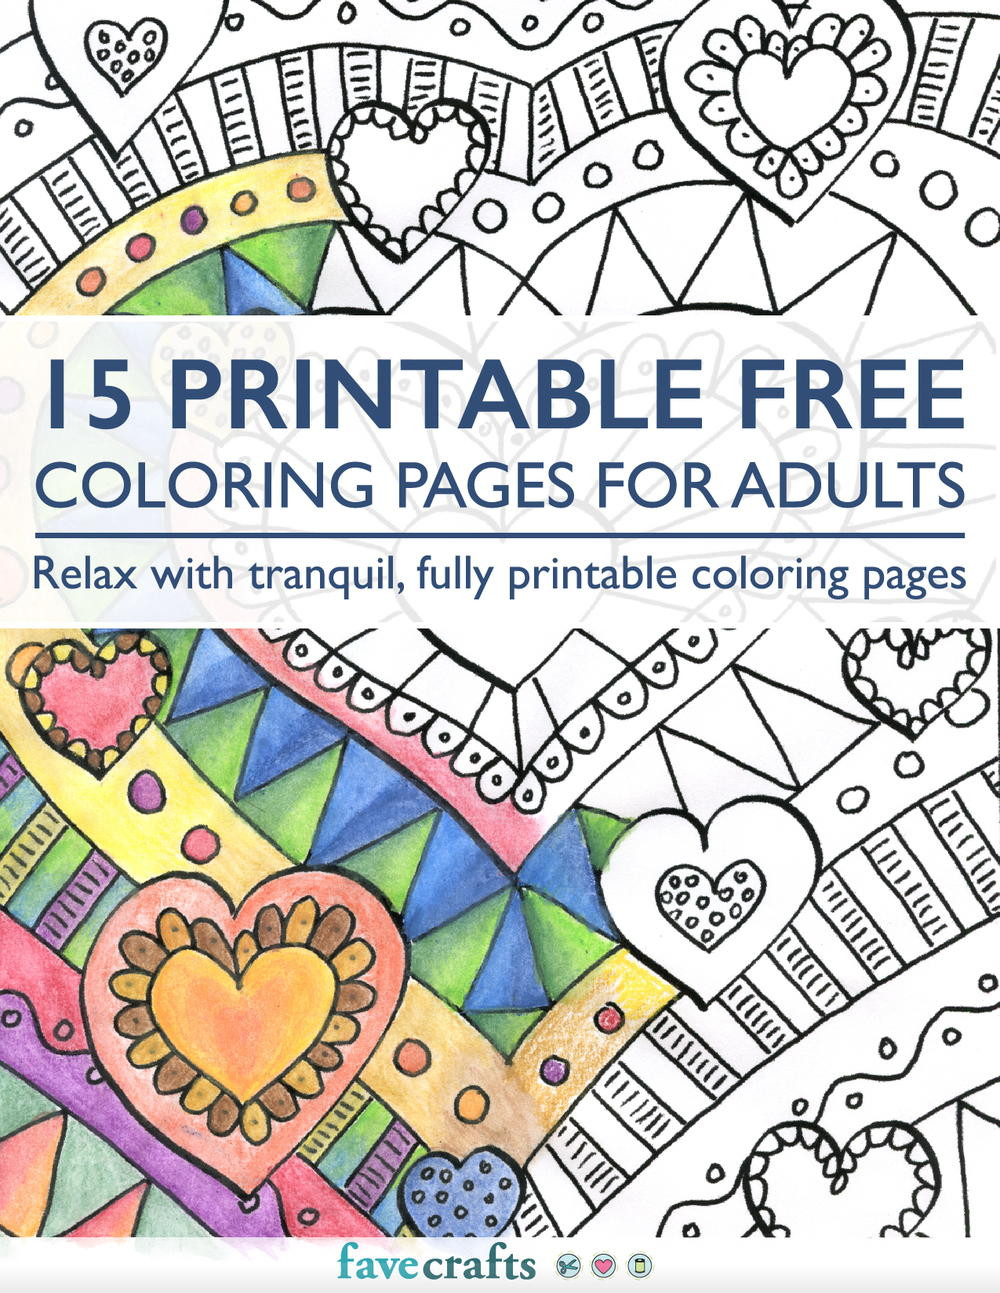 Big Adult Coloring Books
 15 Printable Free Coloring Pages for Adults [PDF